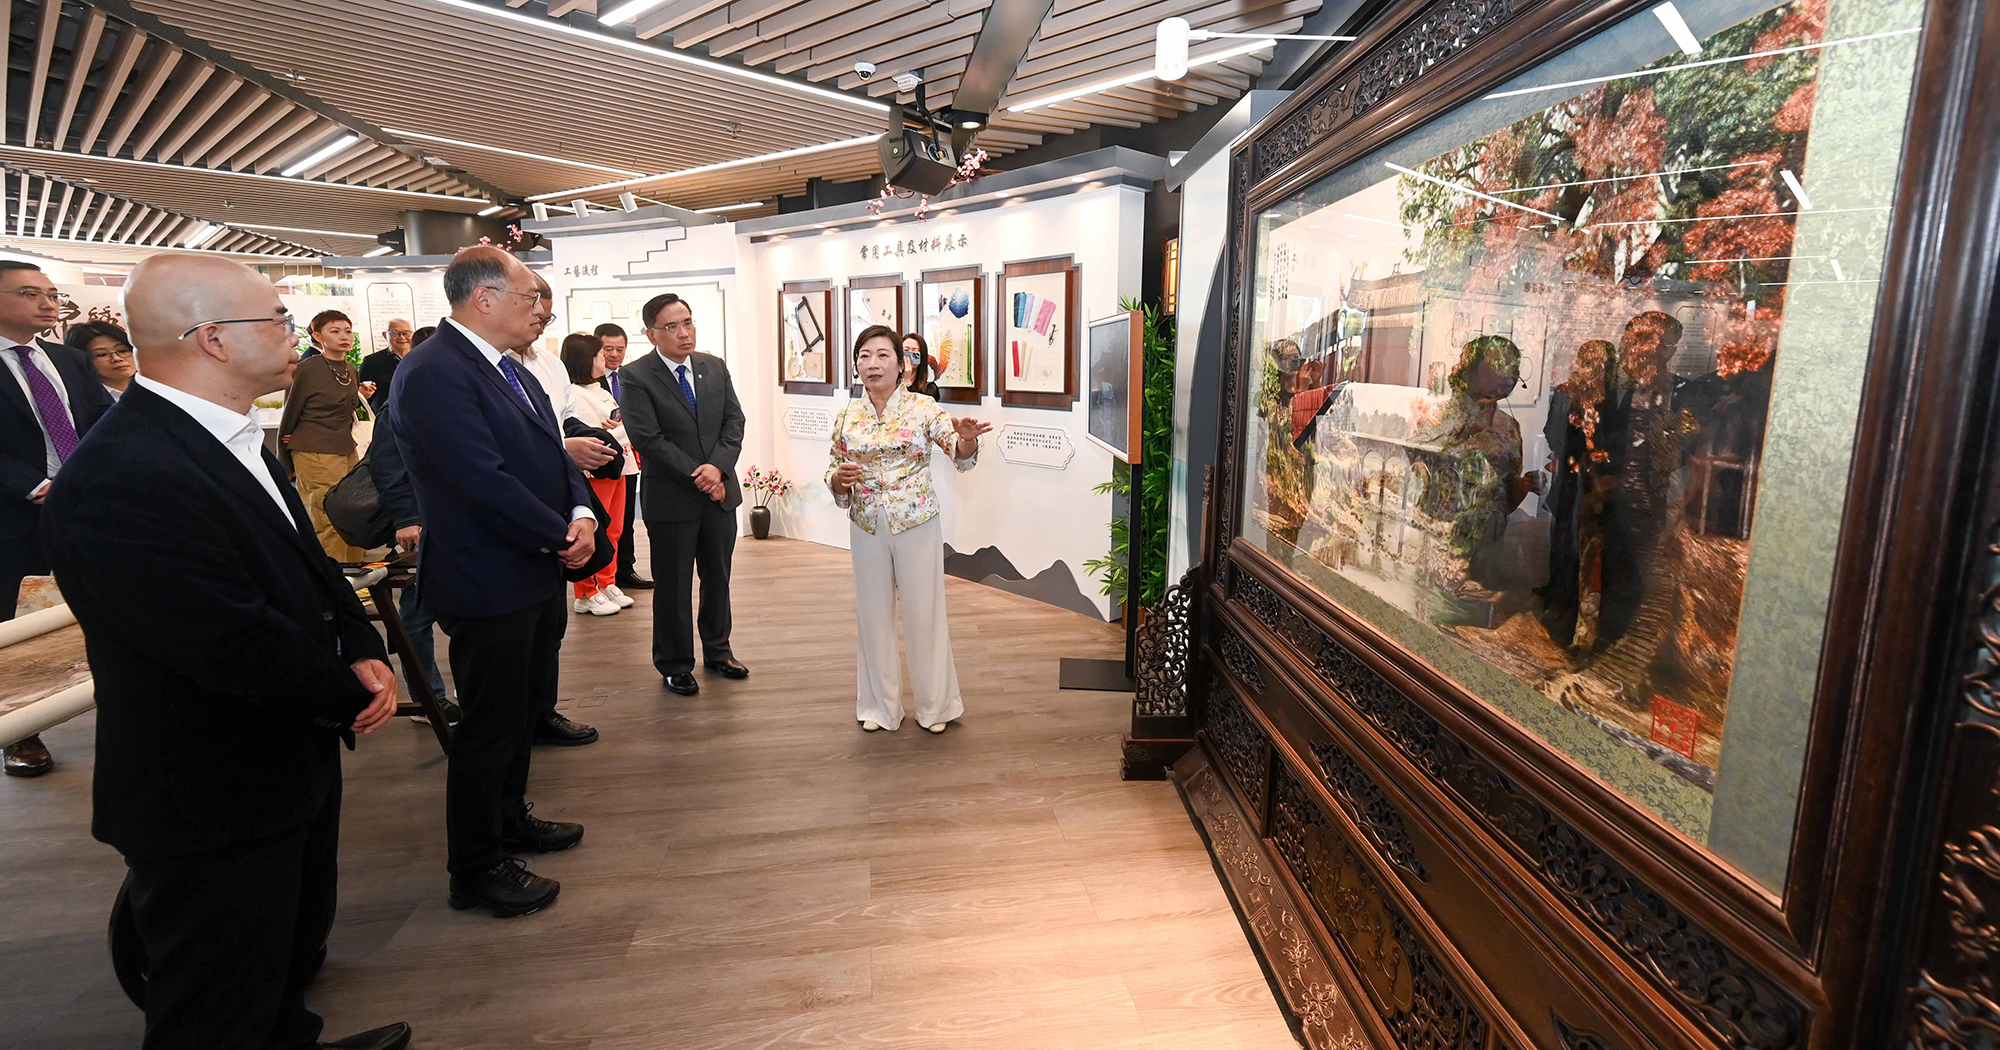 Ms Zou Shengzhu, Senior Arts and Crafts Artiest of Zhejiang Industry and Trade Vocational College and Zhejiang Arts and Crafts Master, introduced the Ou embroidery exhibits in a guided tour.